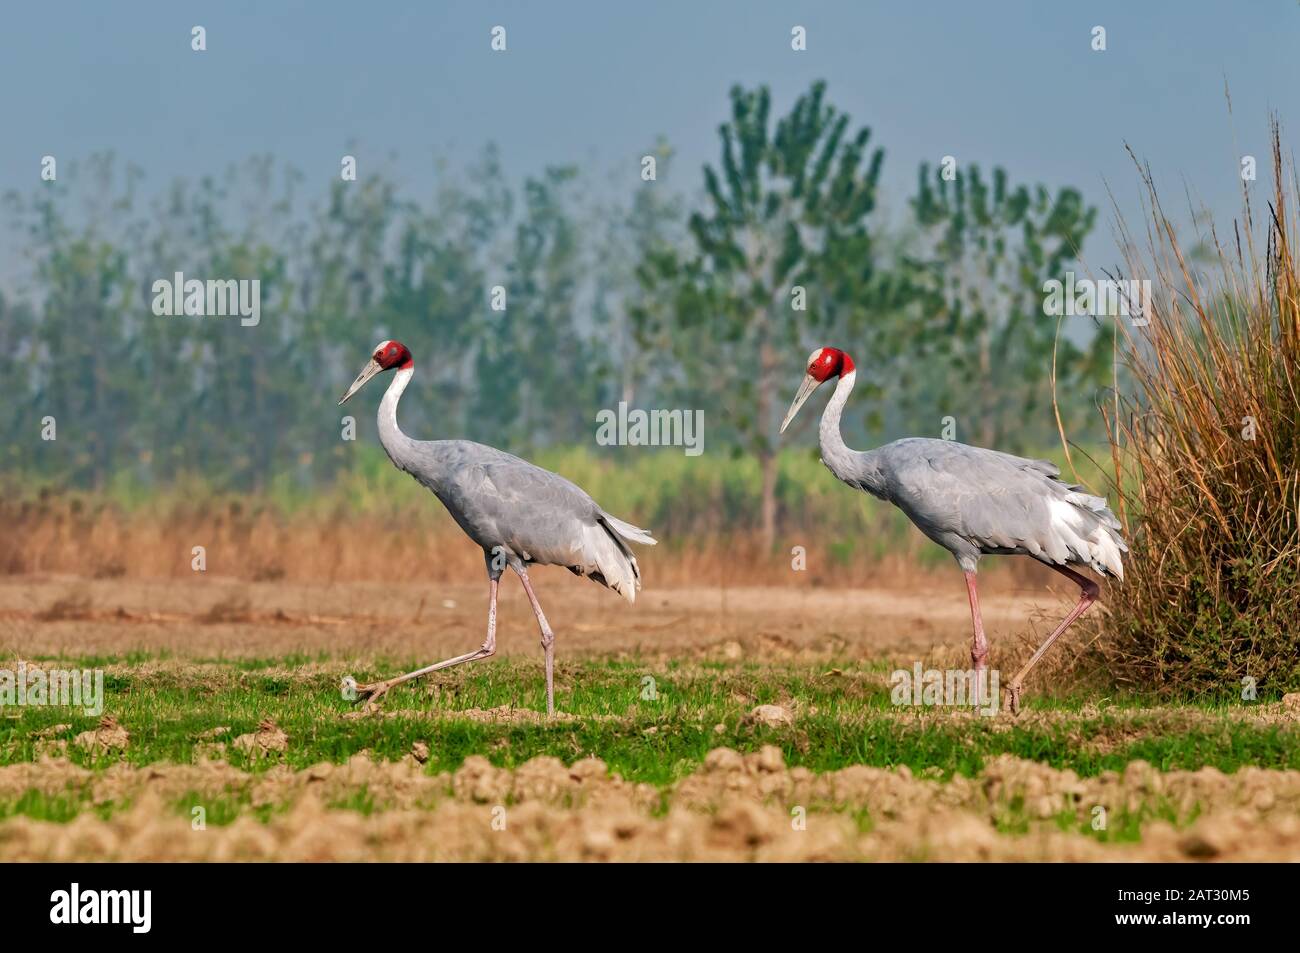 A couple of sarus crane waliking in the field Stock Photo